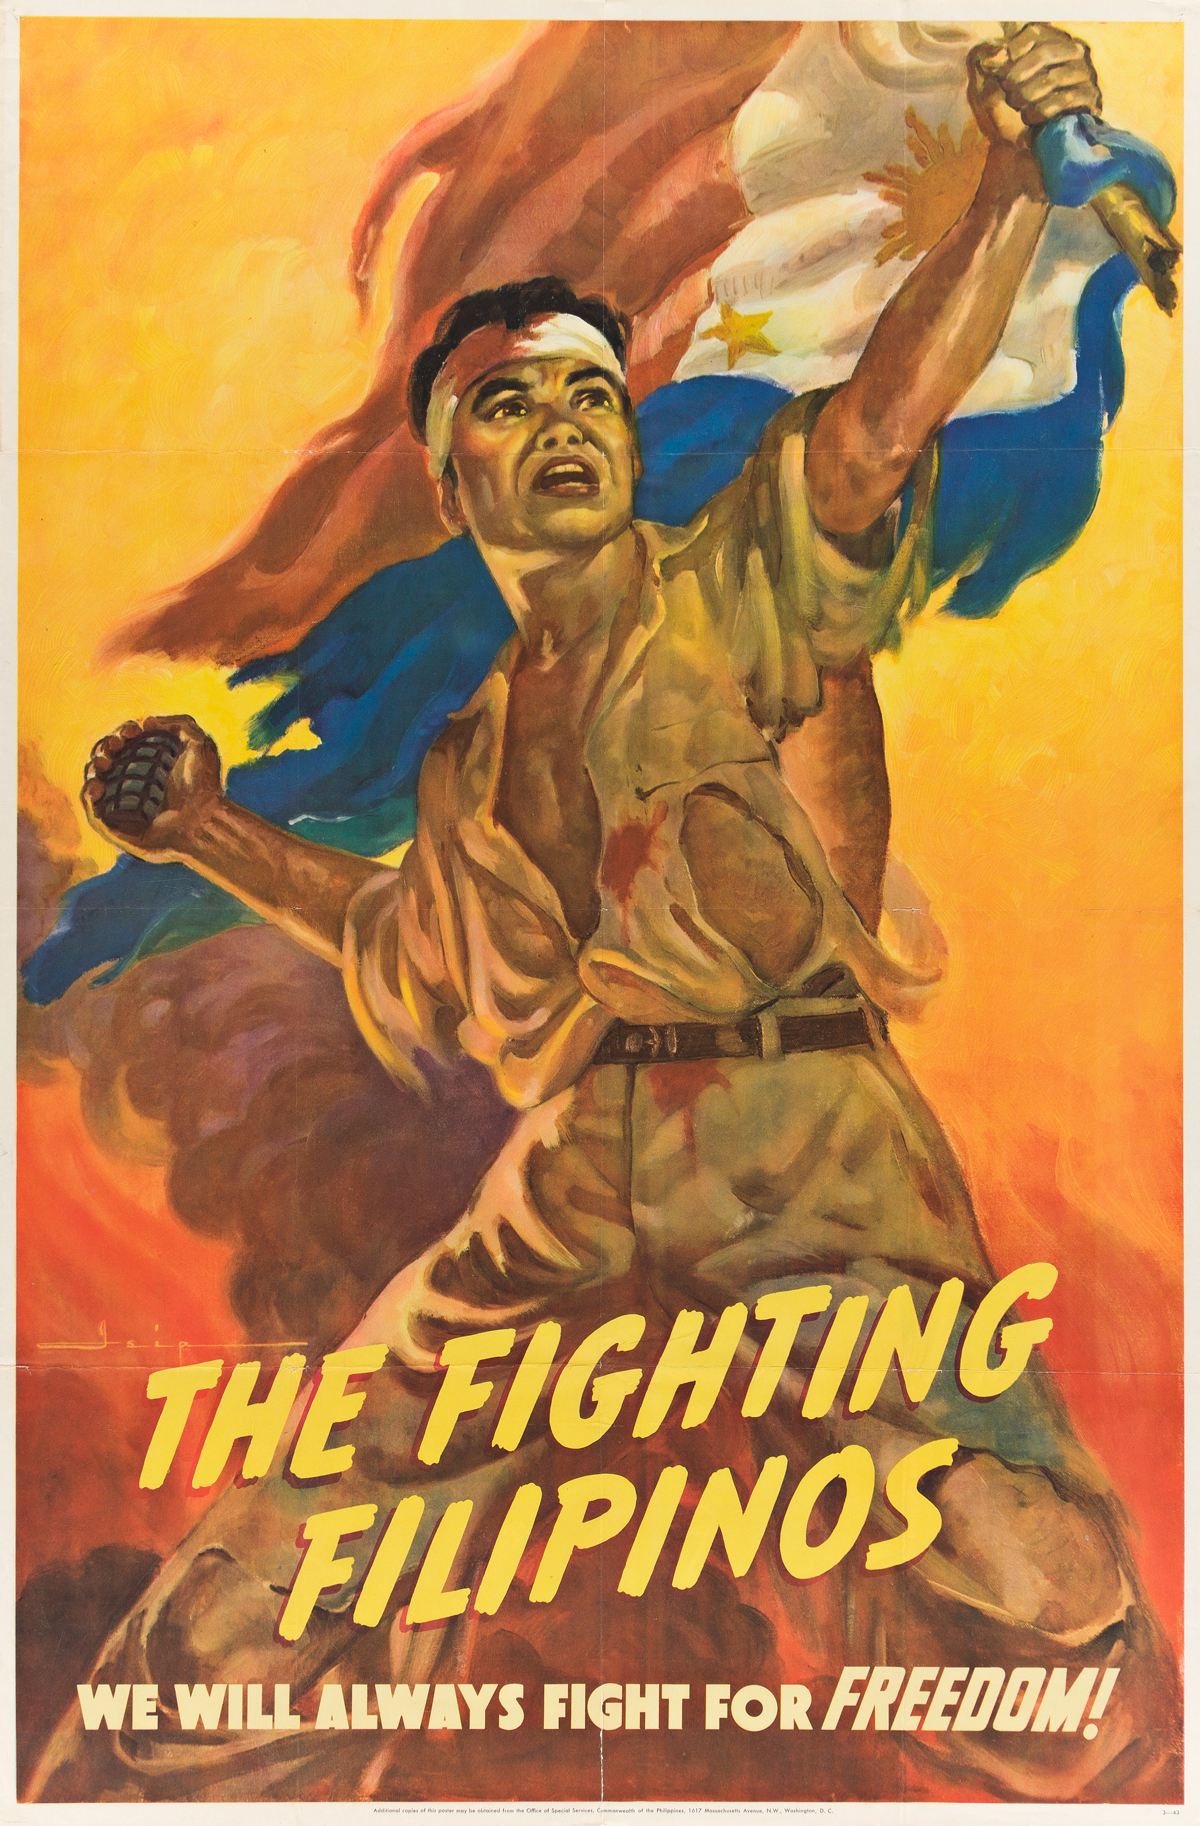 MANUEL REY ISIP (1904-1987).  THE FIGHTING FILIPINOS. 1943. 41x27 inches, 104x68½ cm. Office of Special Services, Washington D.C.